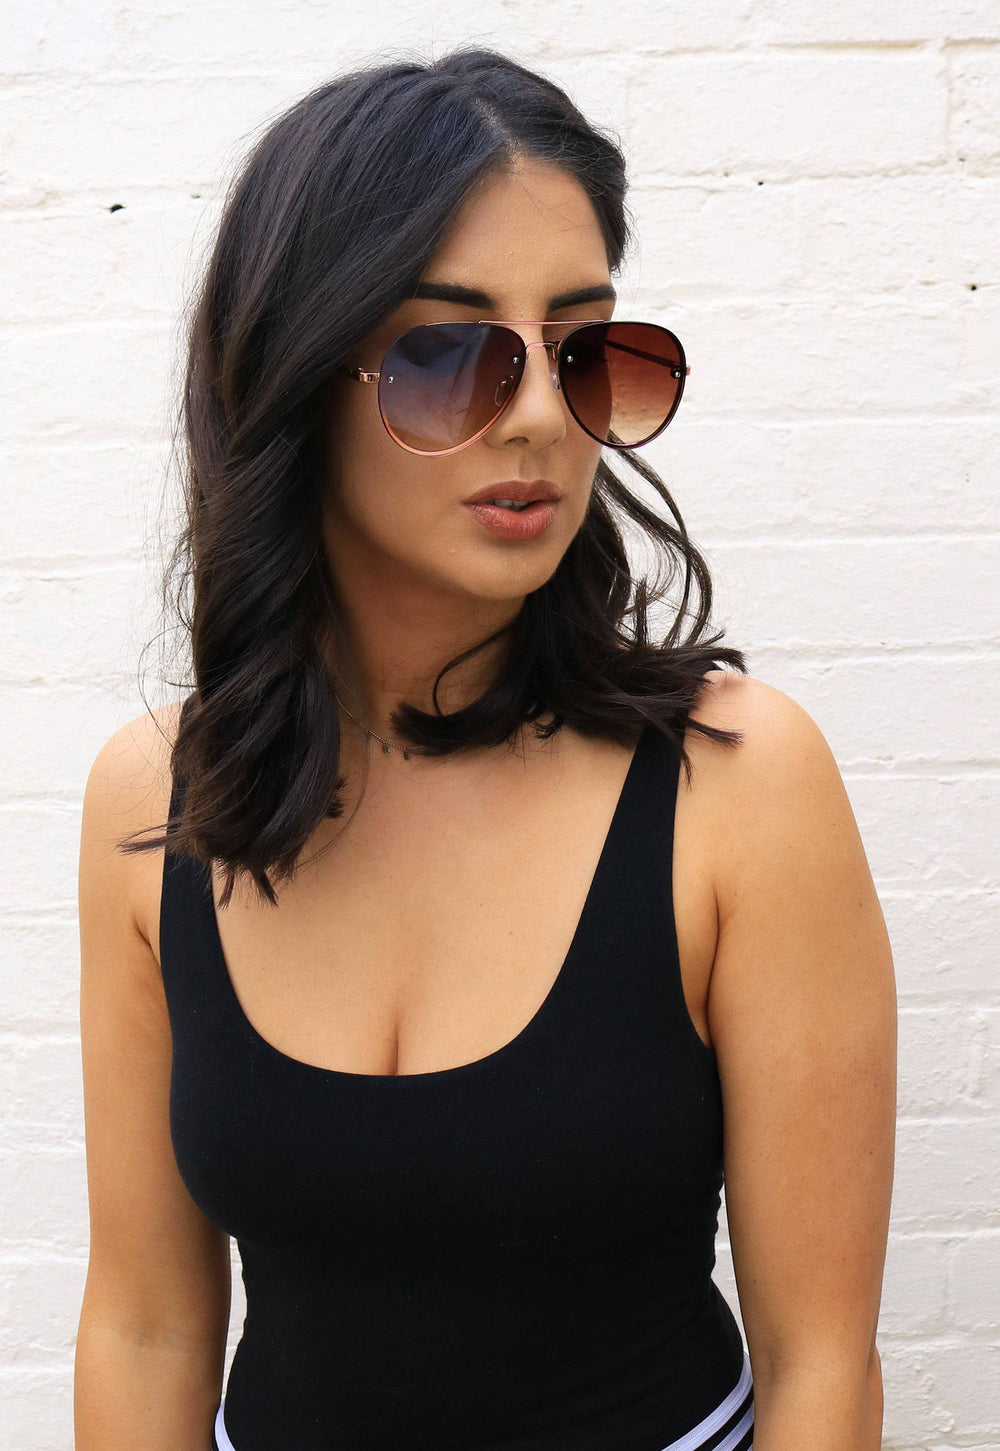 Lana Metal Rim Graduated Lens Oversized Aviator Sunglasses in Brown with Rose Gold Frame - One Nation Clothing